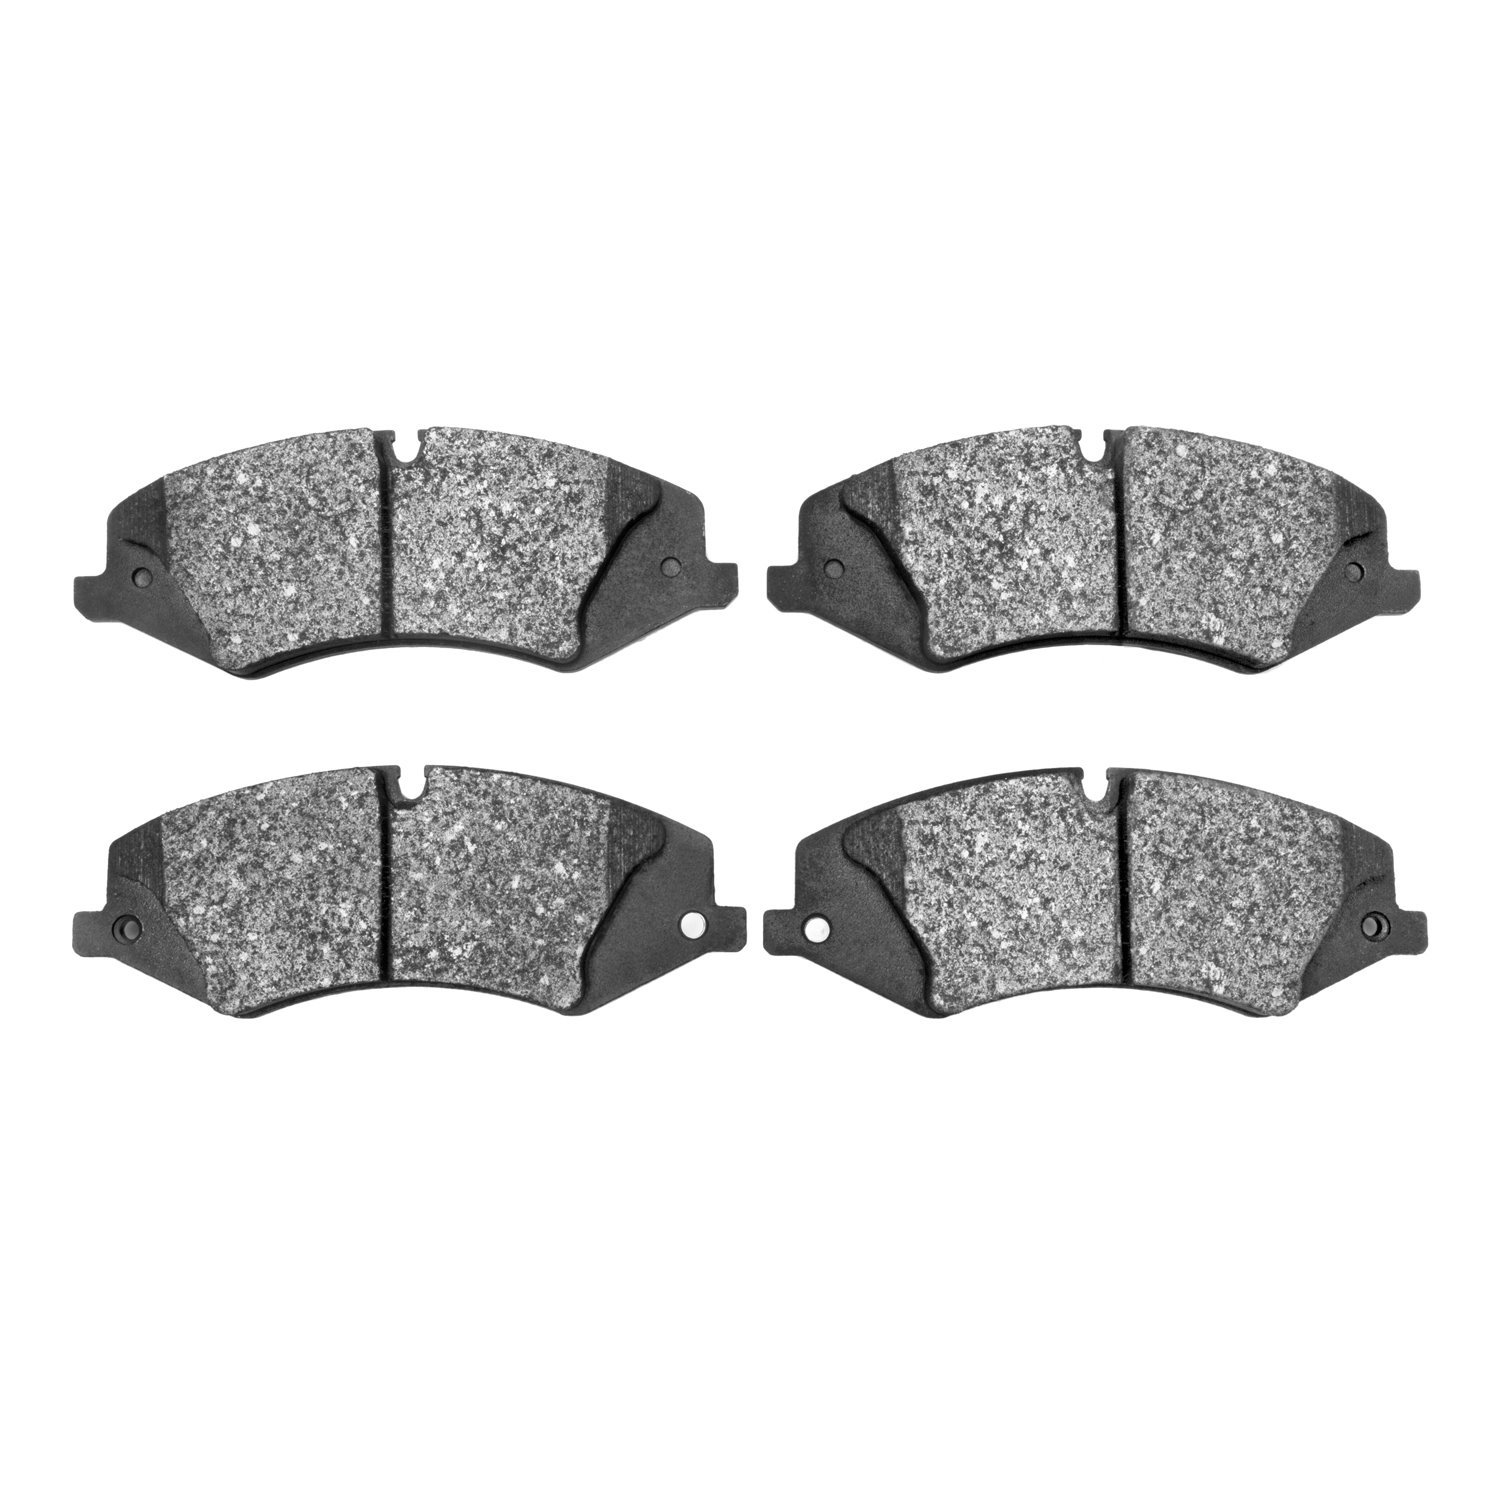 Euro Ceramic Brake Pads, 2010-2017 Land Rover, Position: Front